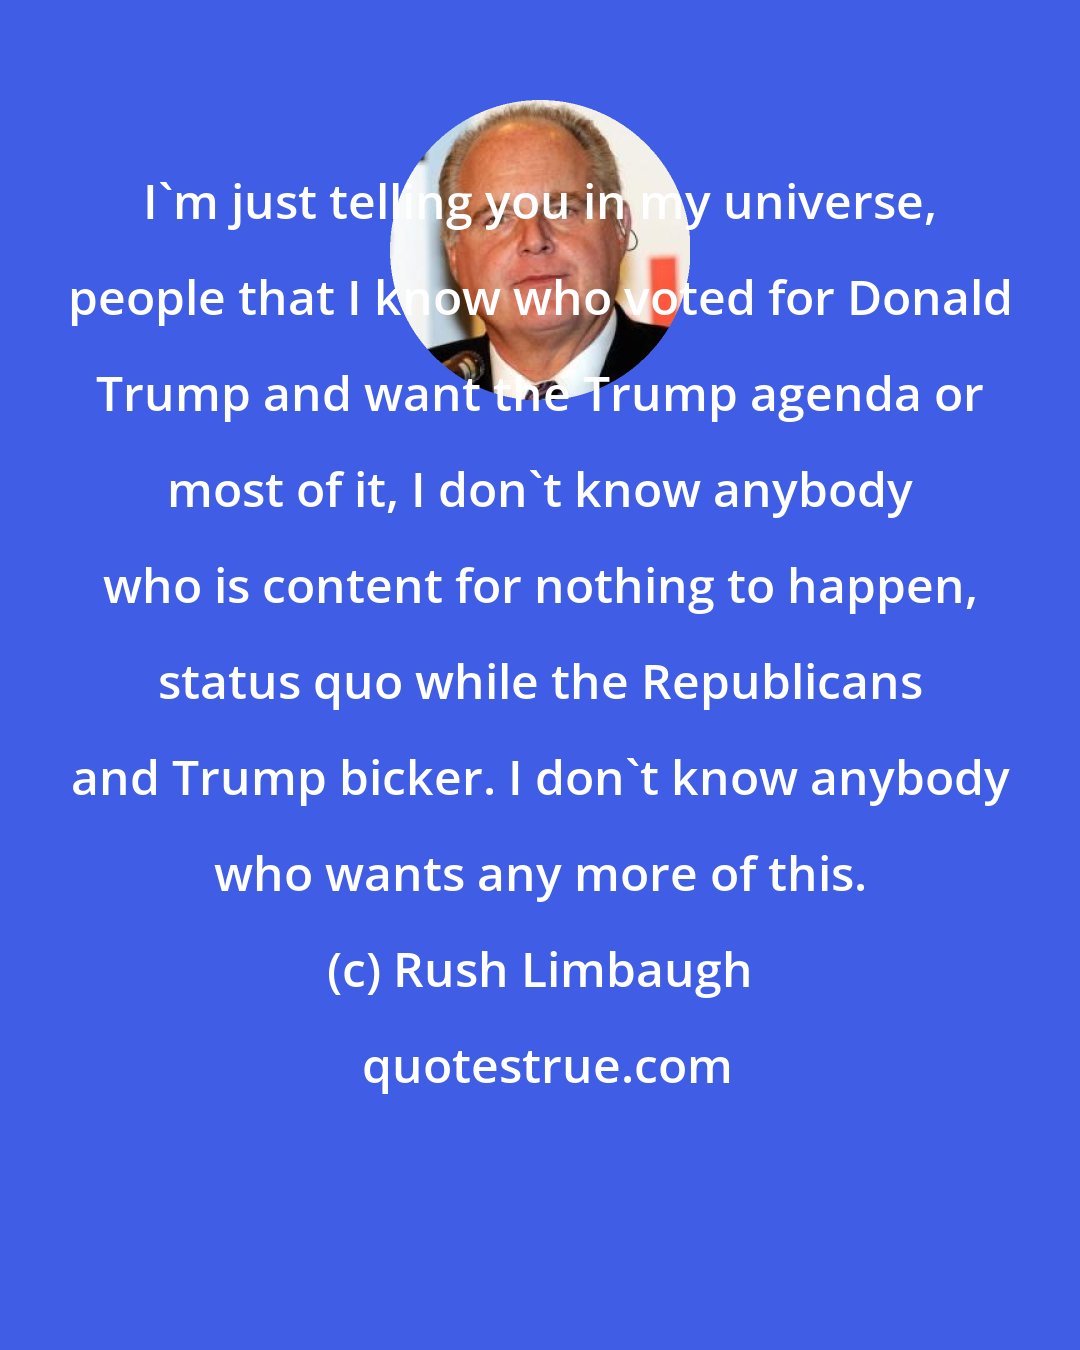 Rush Limbaugh: I'm just telling you in my universe, people that I know who voted for Donald Trump and want the Trump agenda or most of it, I don't know anybody who is content for nothing to happen, status quo while the Republicans and Trump bicker. I don't know anybody who wants any more of this.